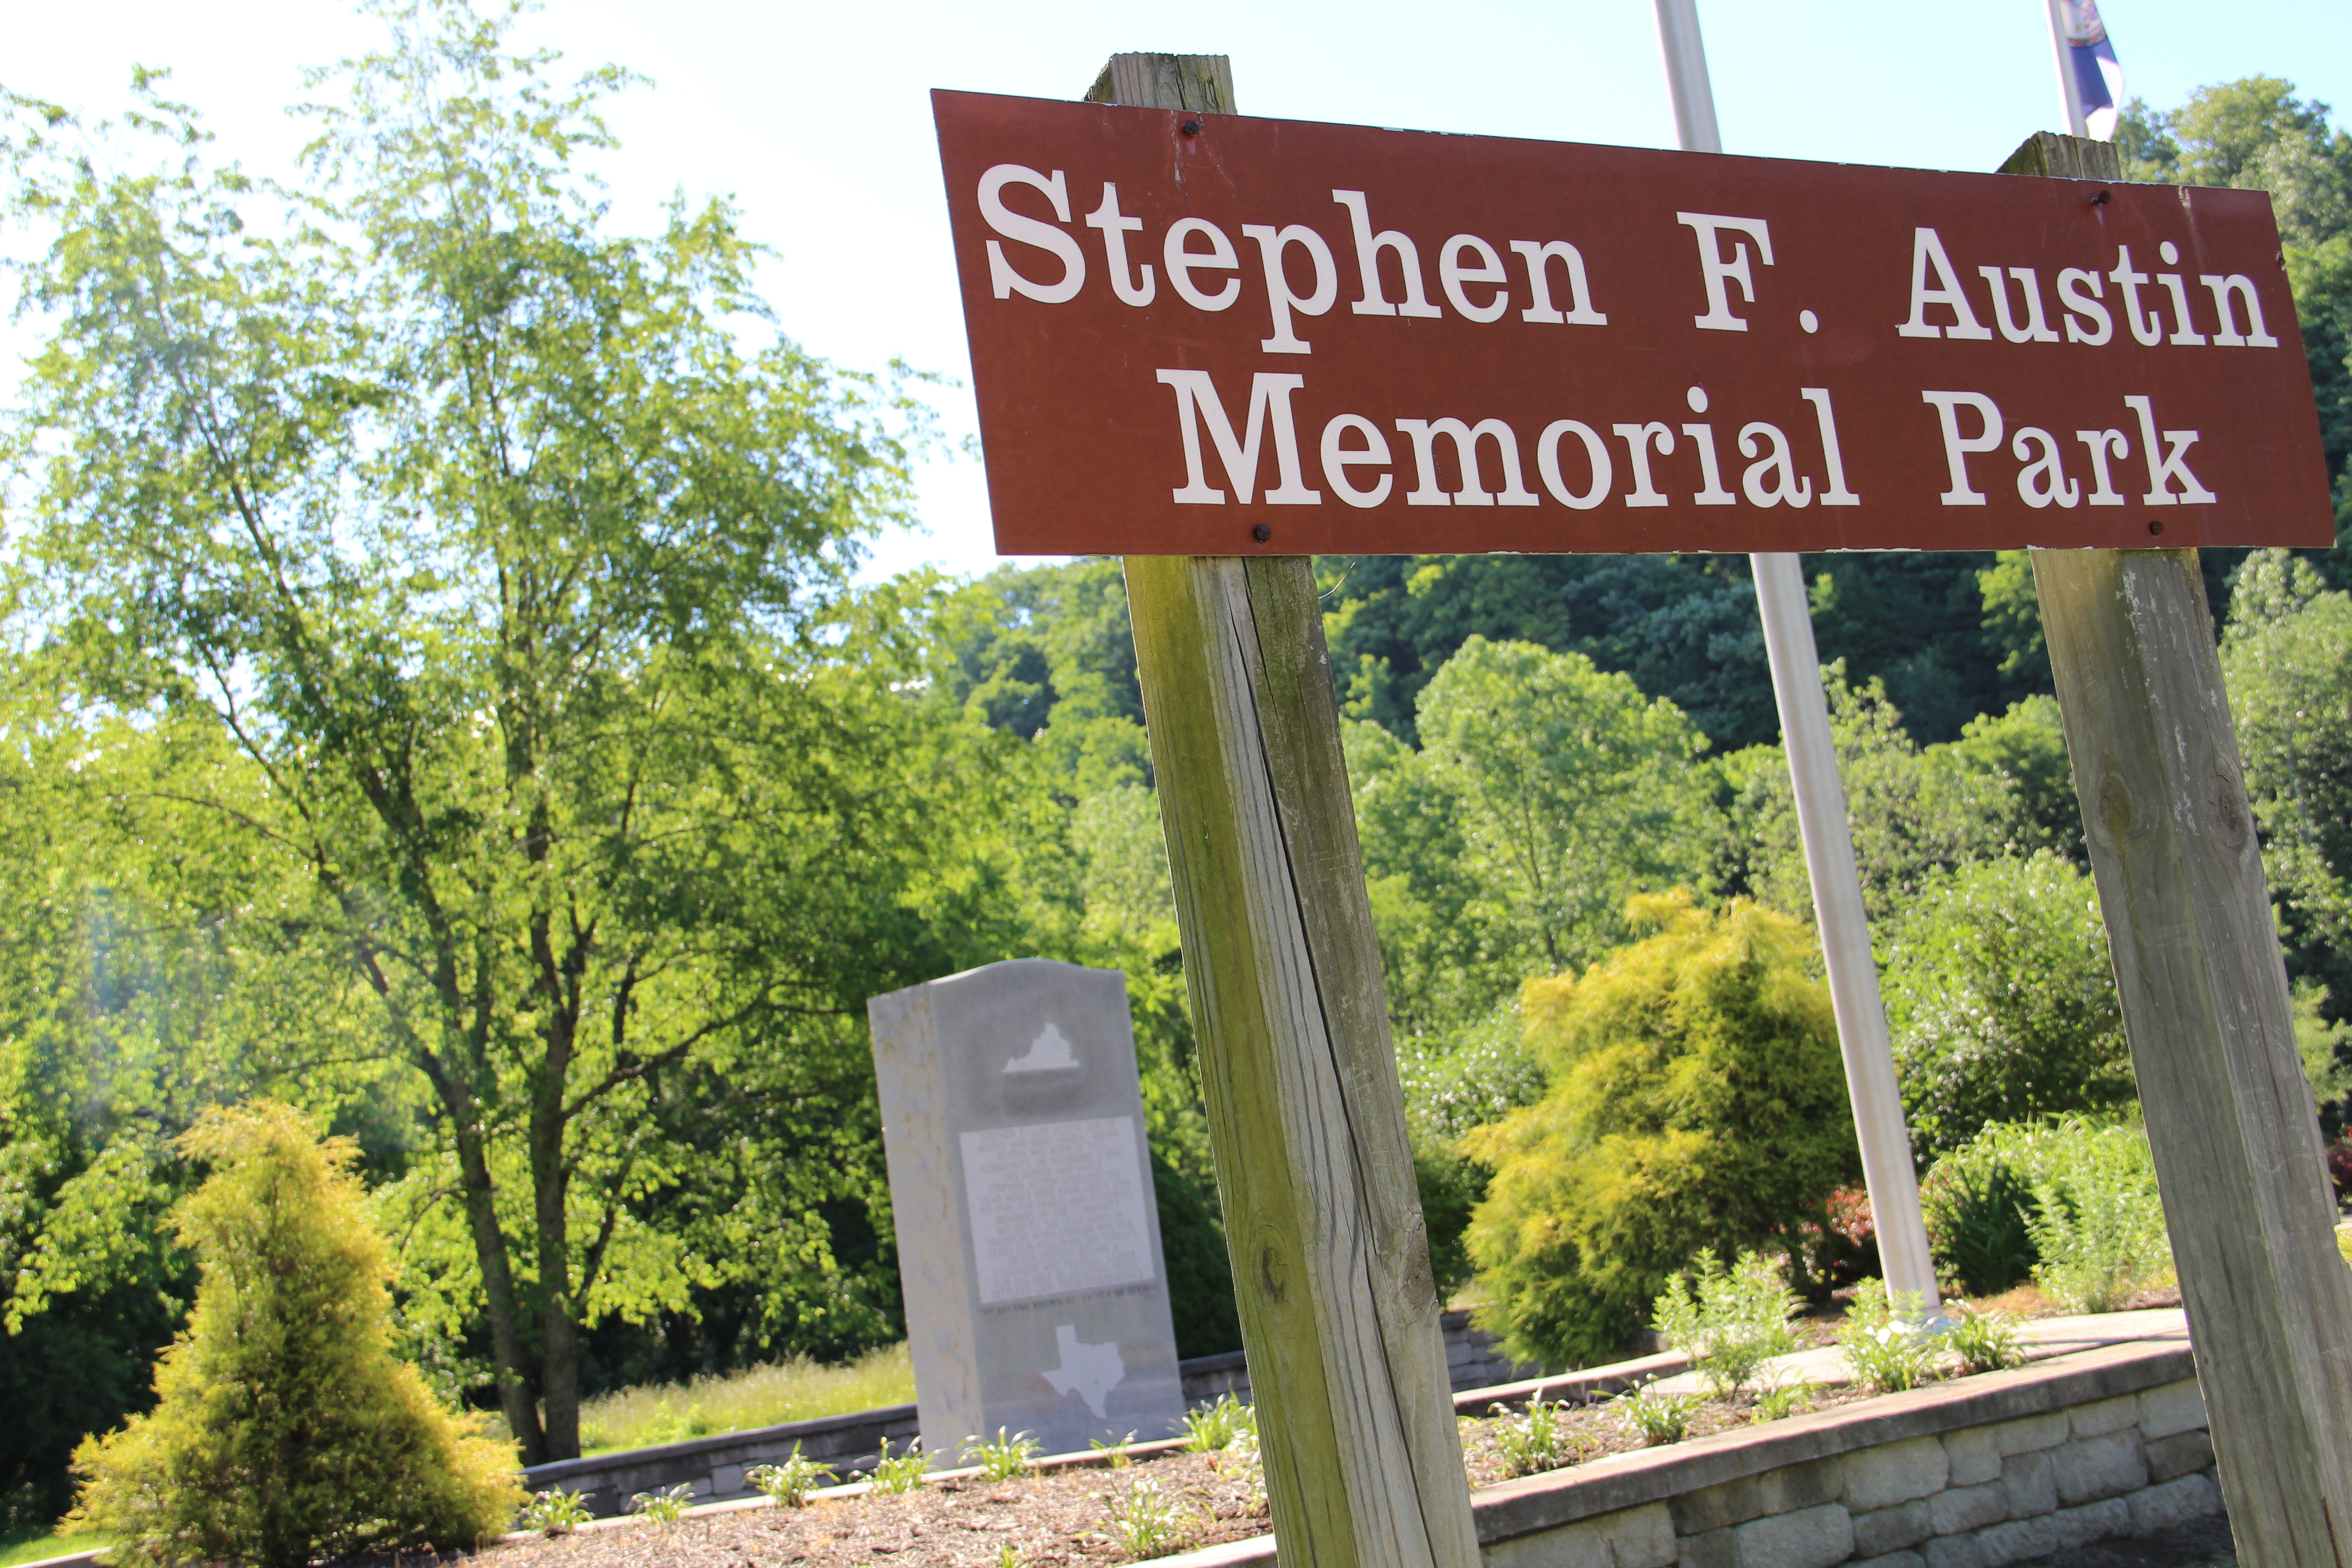 MEETING SCHEDULED TO DISCUSS REPAIRING STEPHEN F. AUSTIN BIRTHPLACE MONUMENT